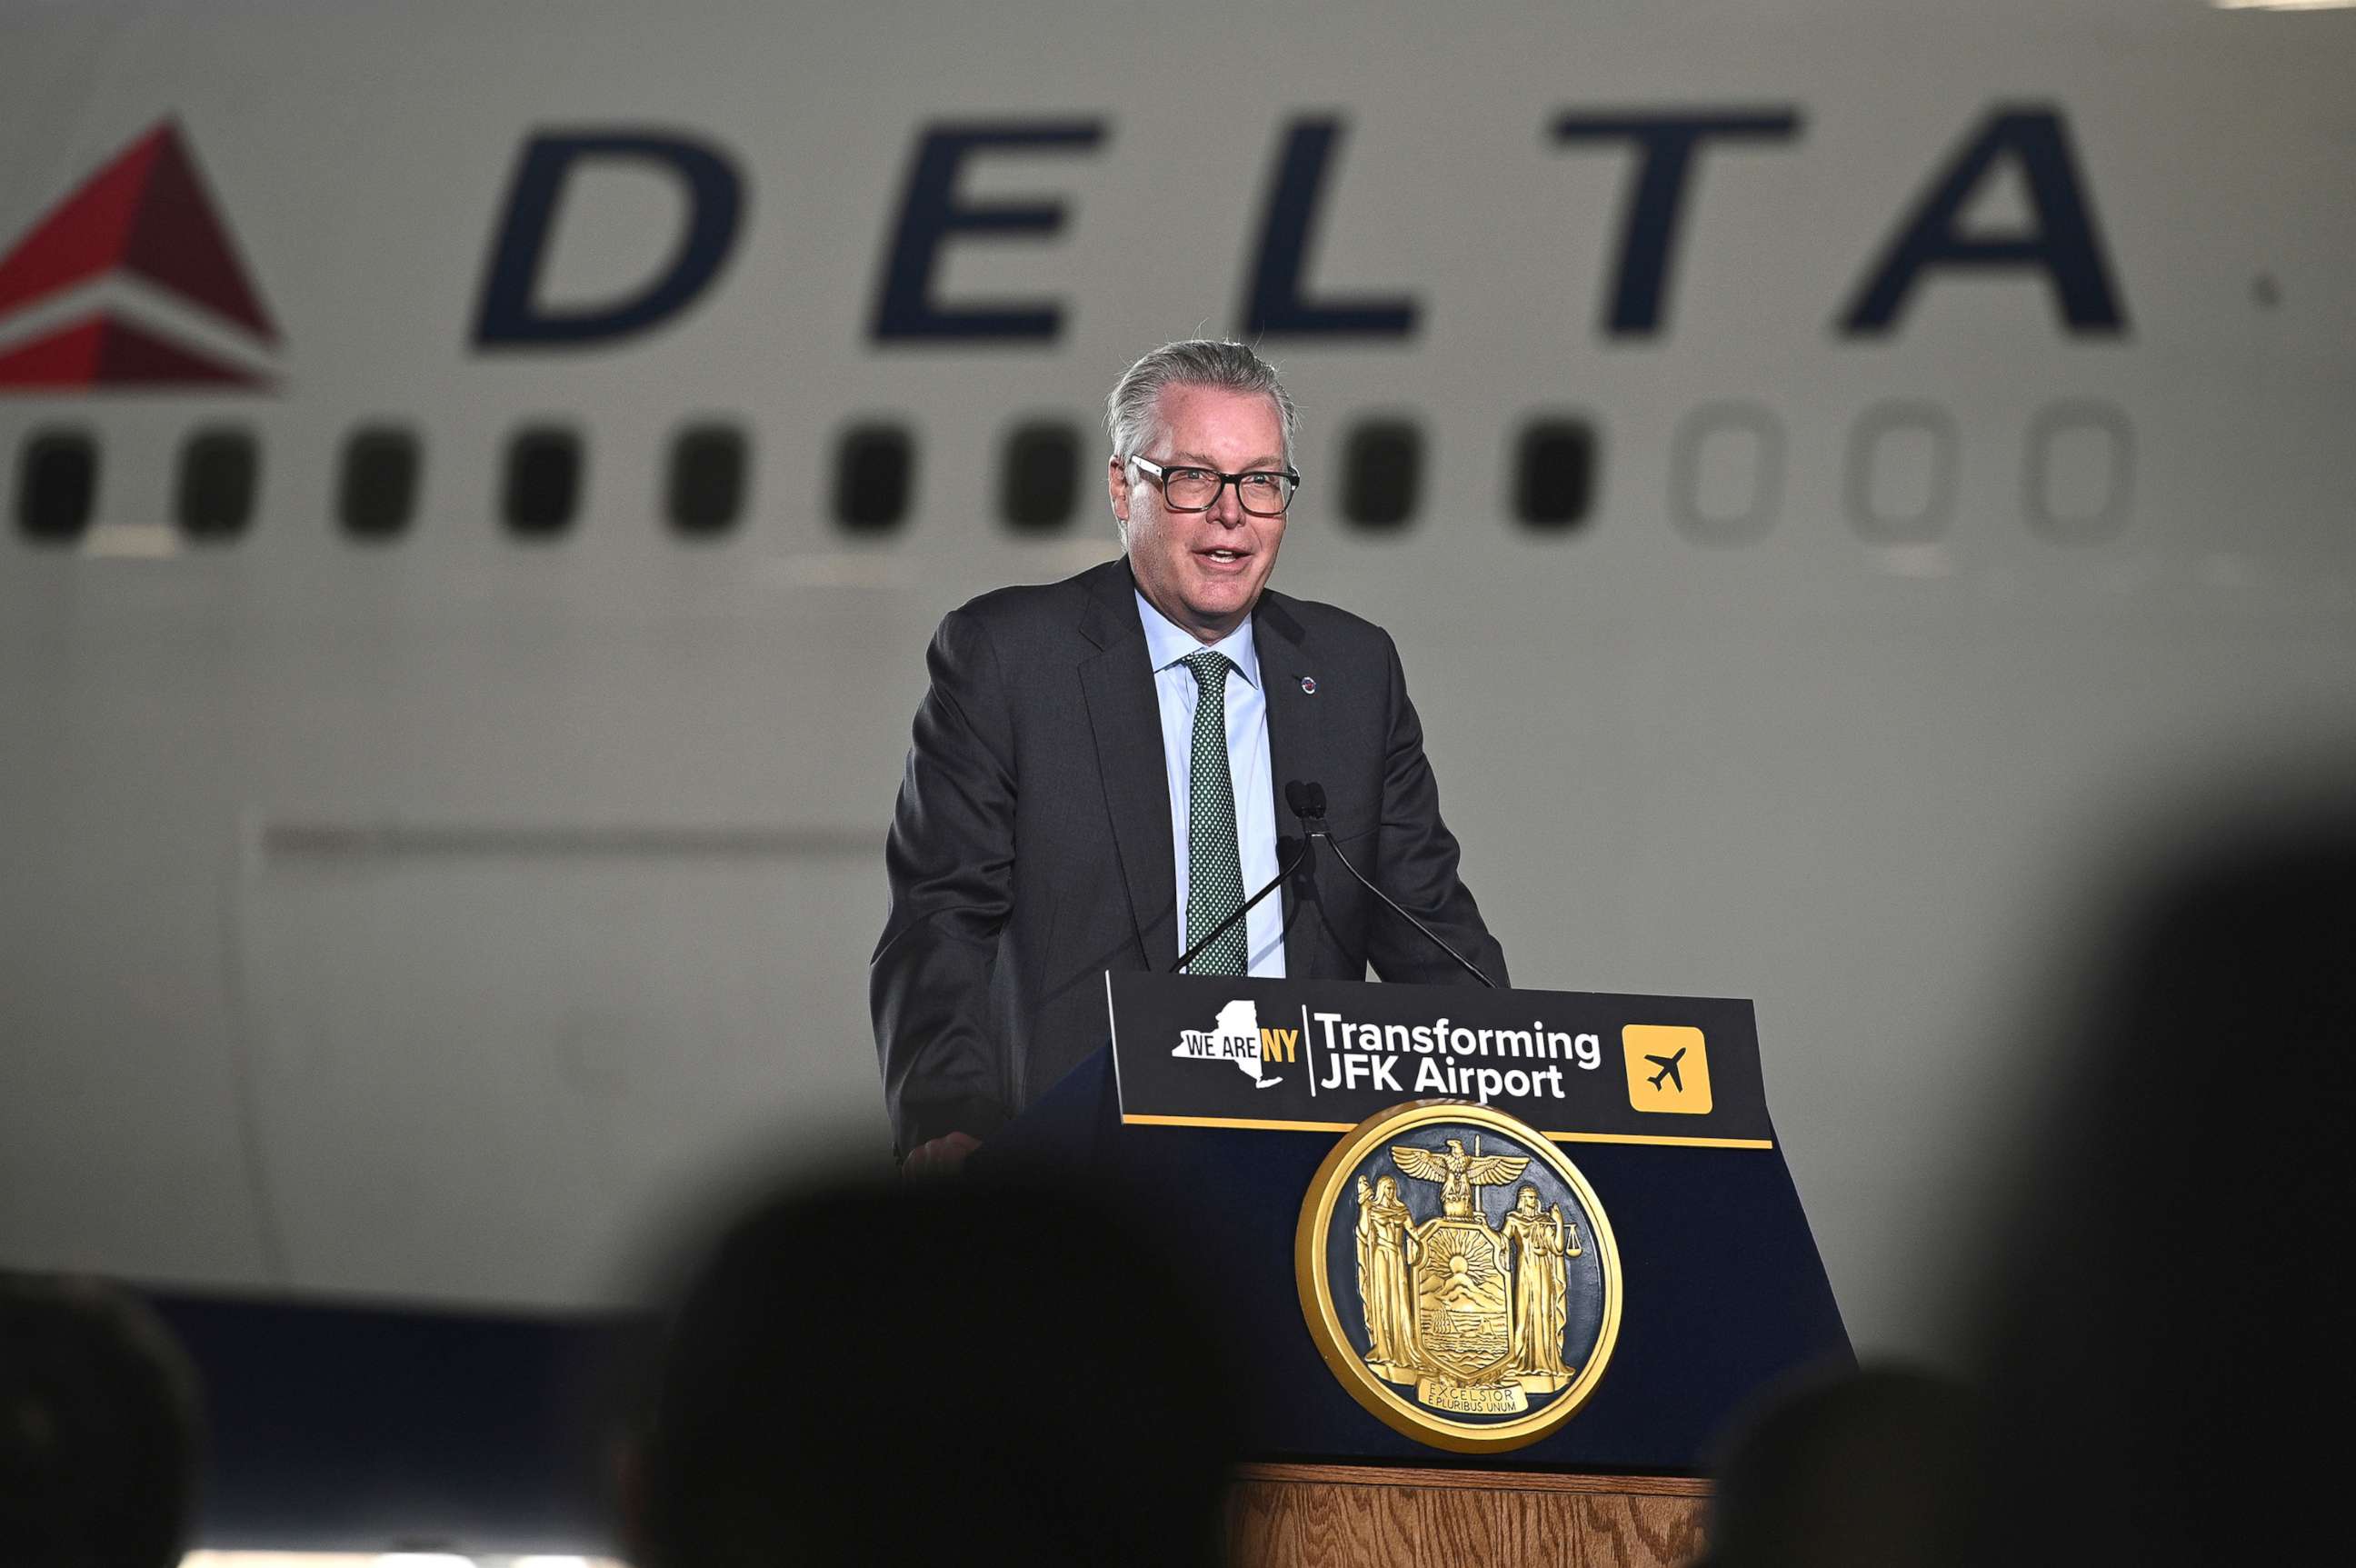 PHOTO: In this Dec. 15, 2021, file photo, Ed Bastian, CEO of Delta Airlines, speaks before the ceremonial groundbreaking of Delta Airline Terminal 4 expansion at John F. Kennedy International Airport in the New York.